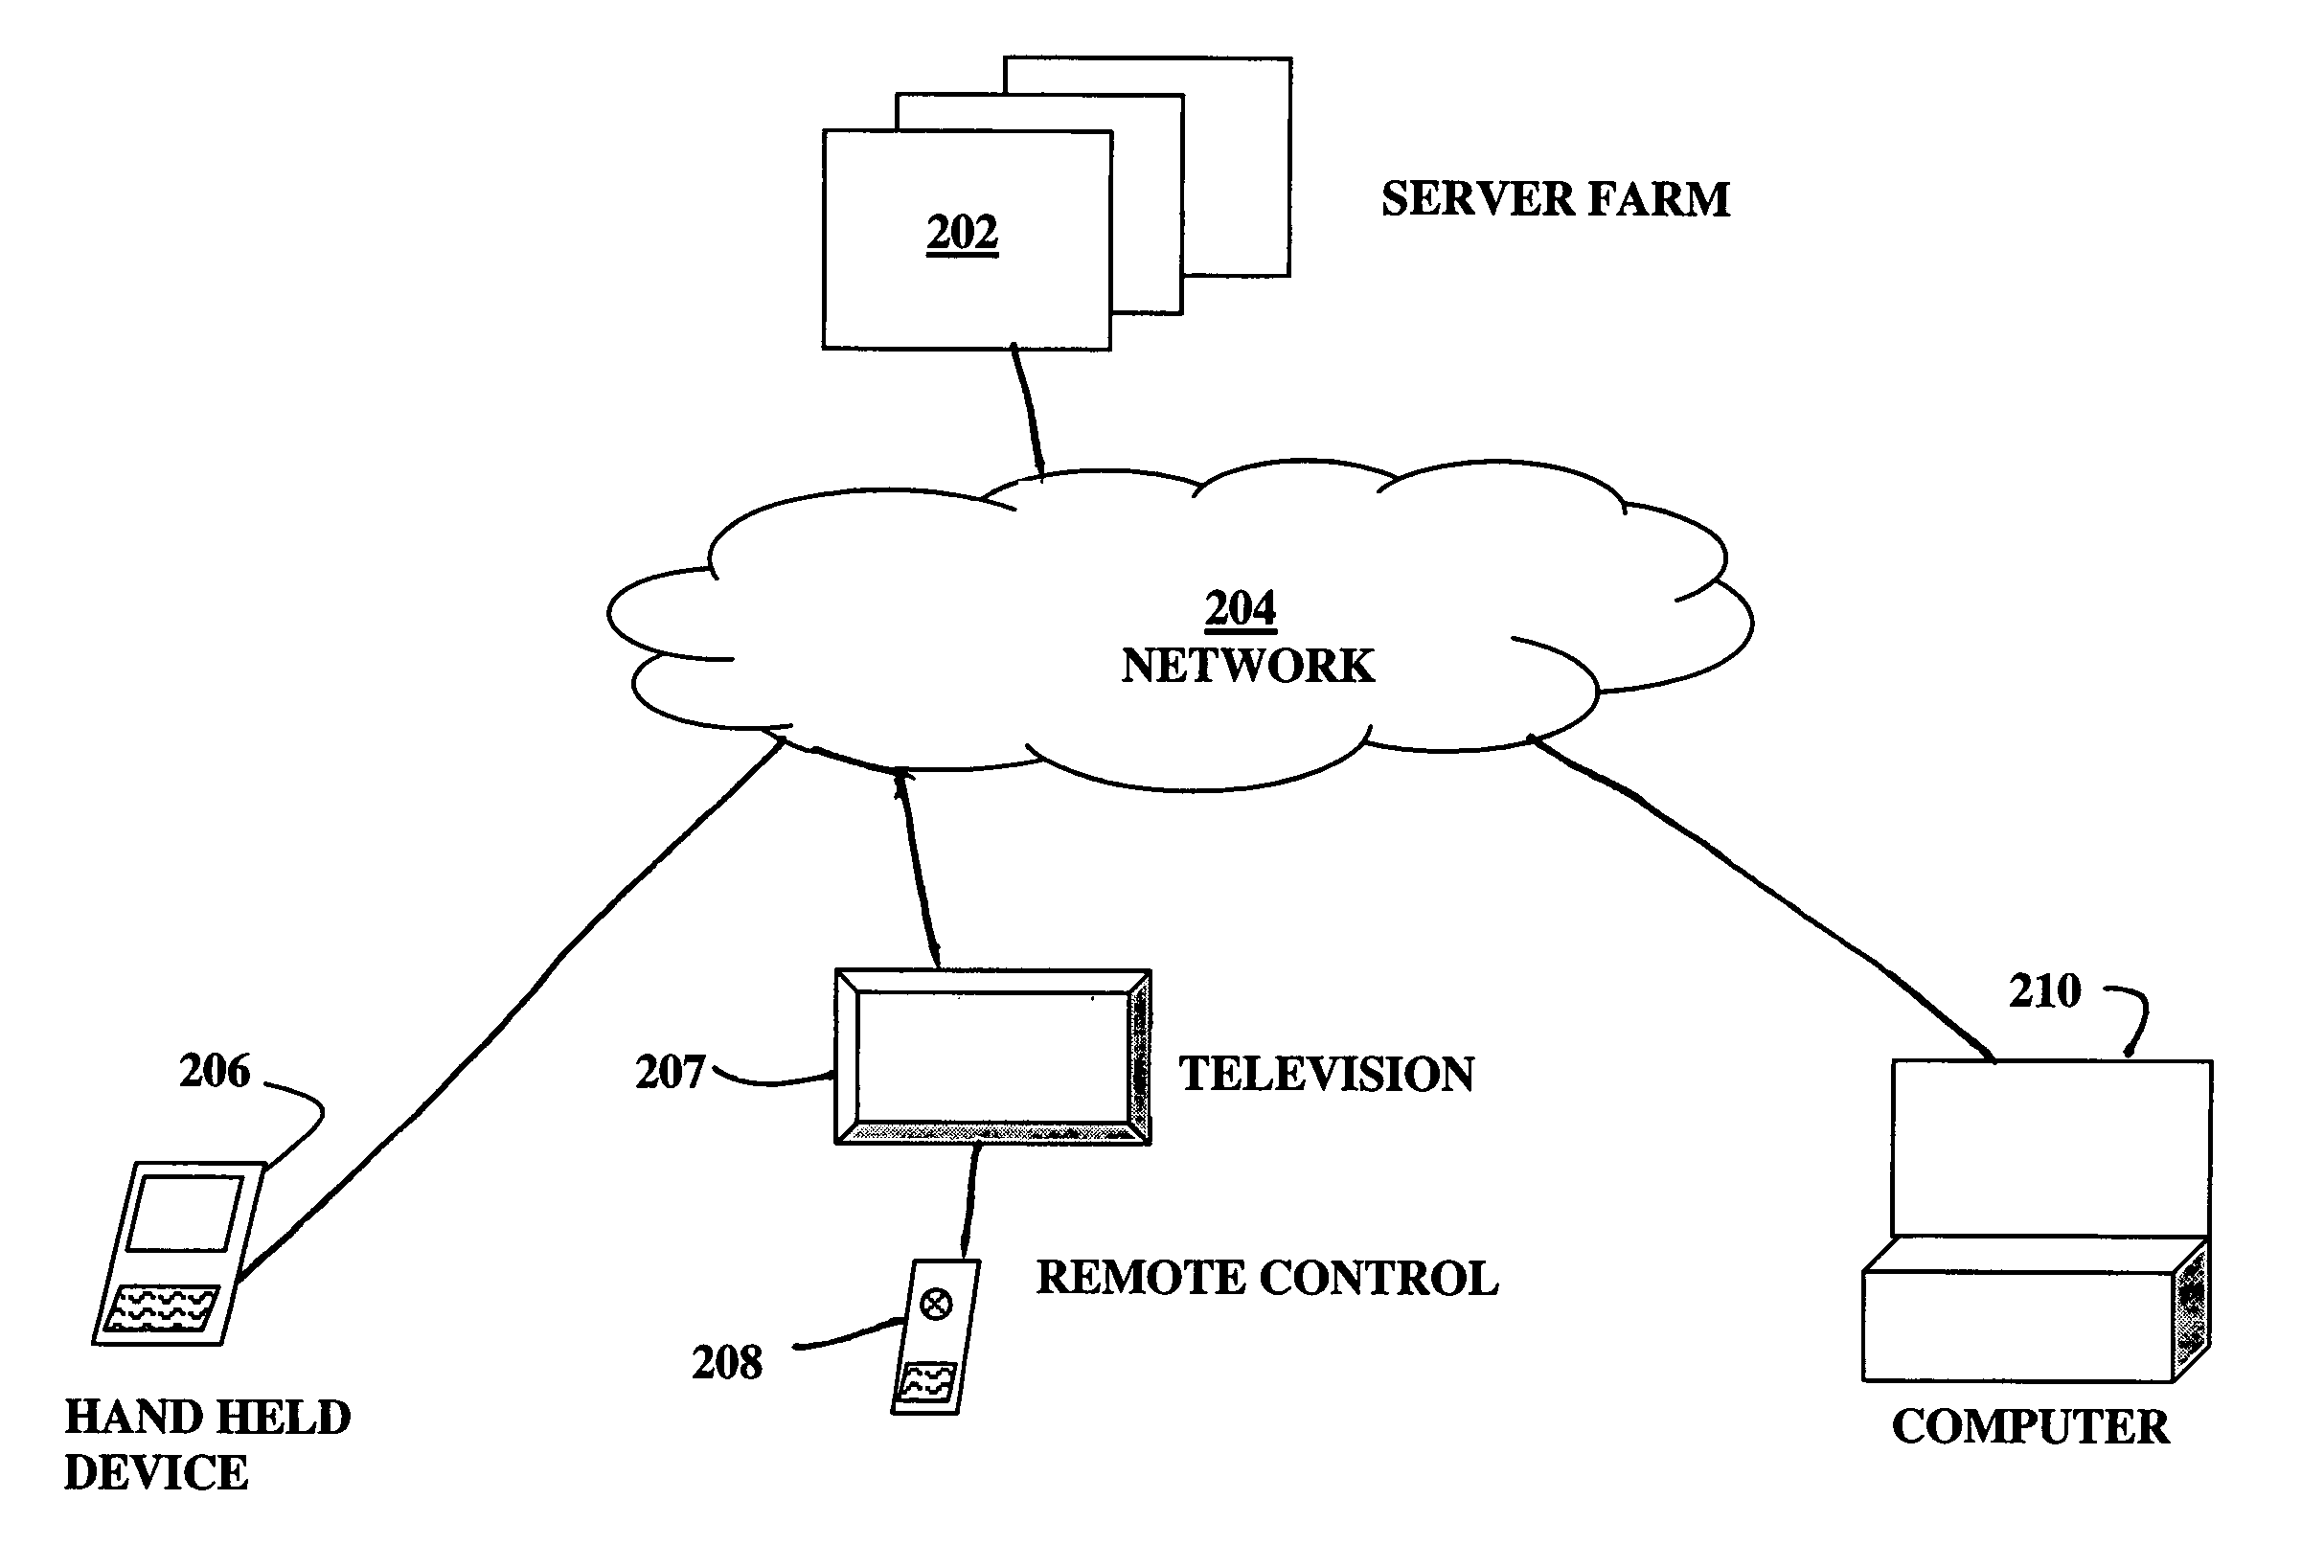 Method and system for processing ambiguous, multi-term search queries